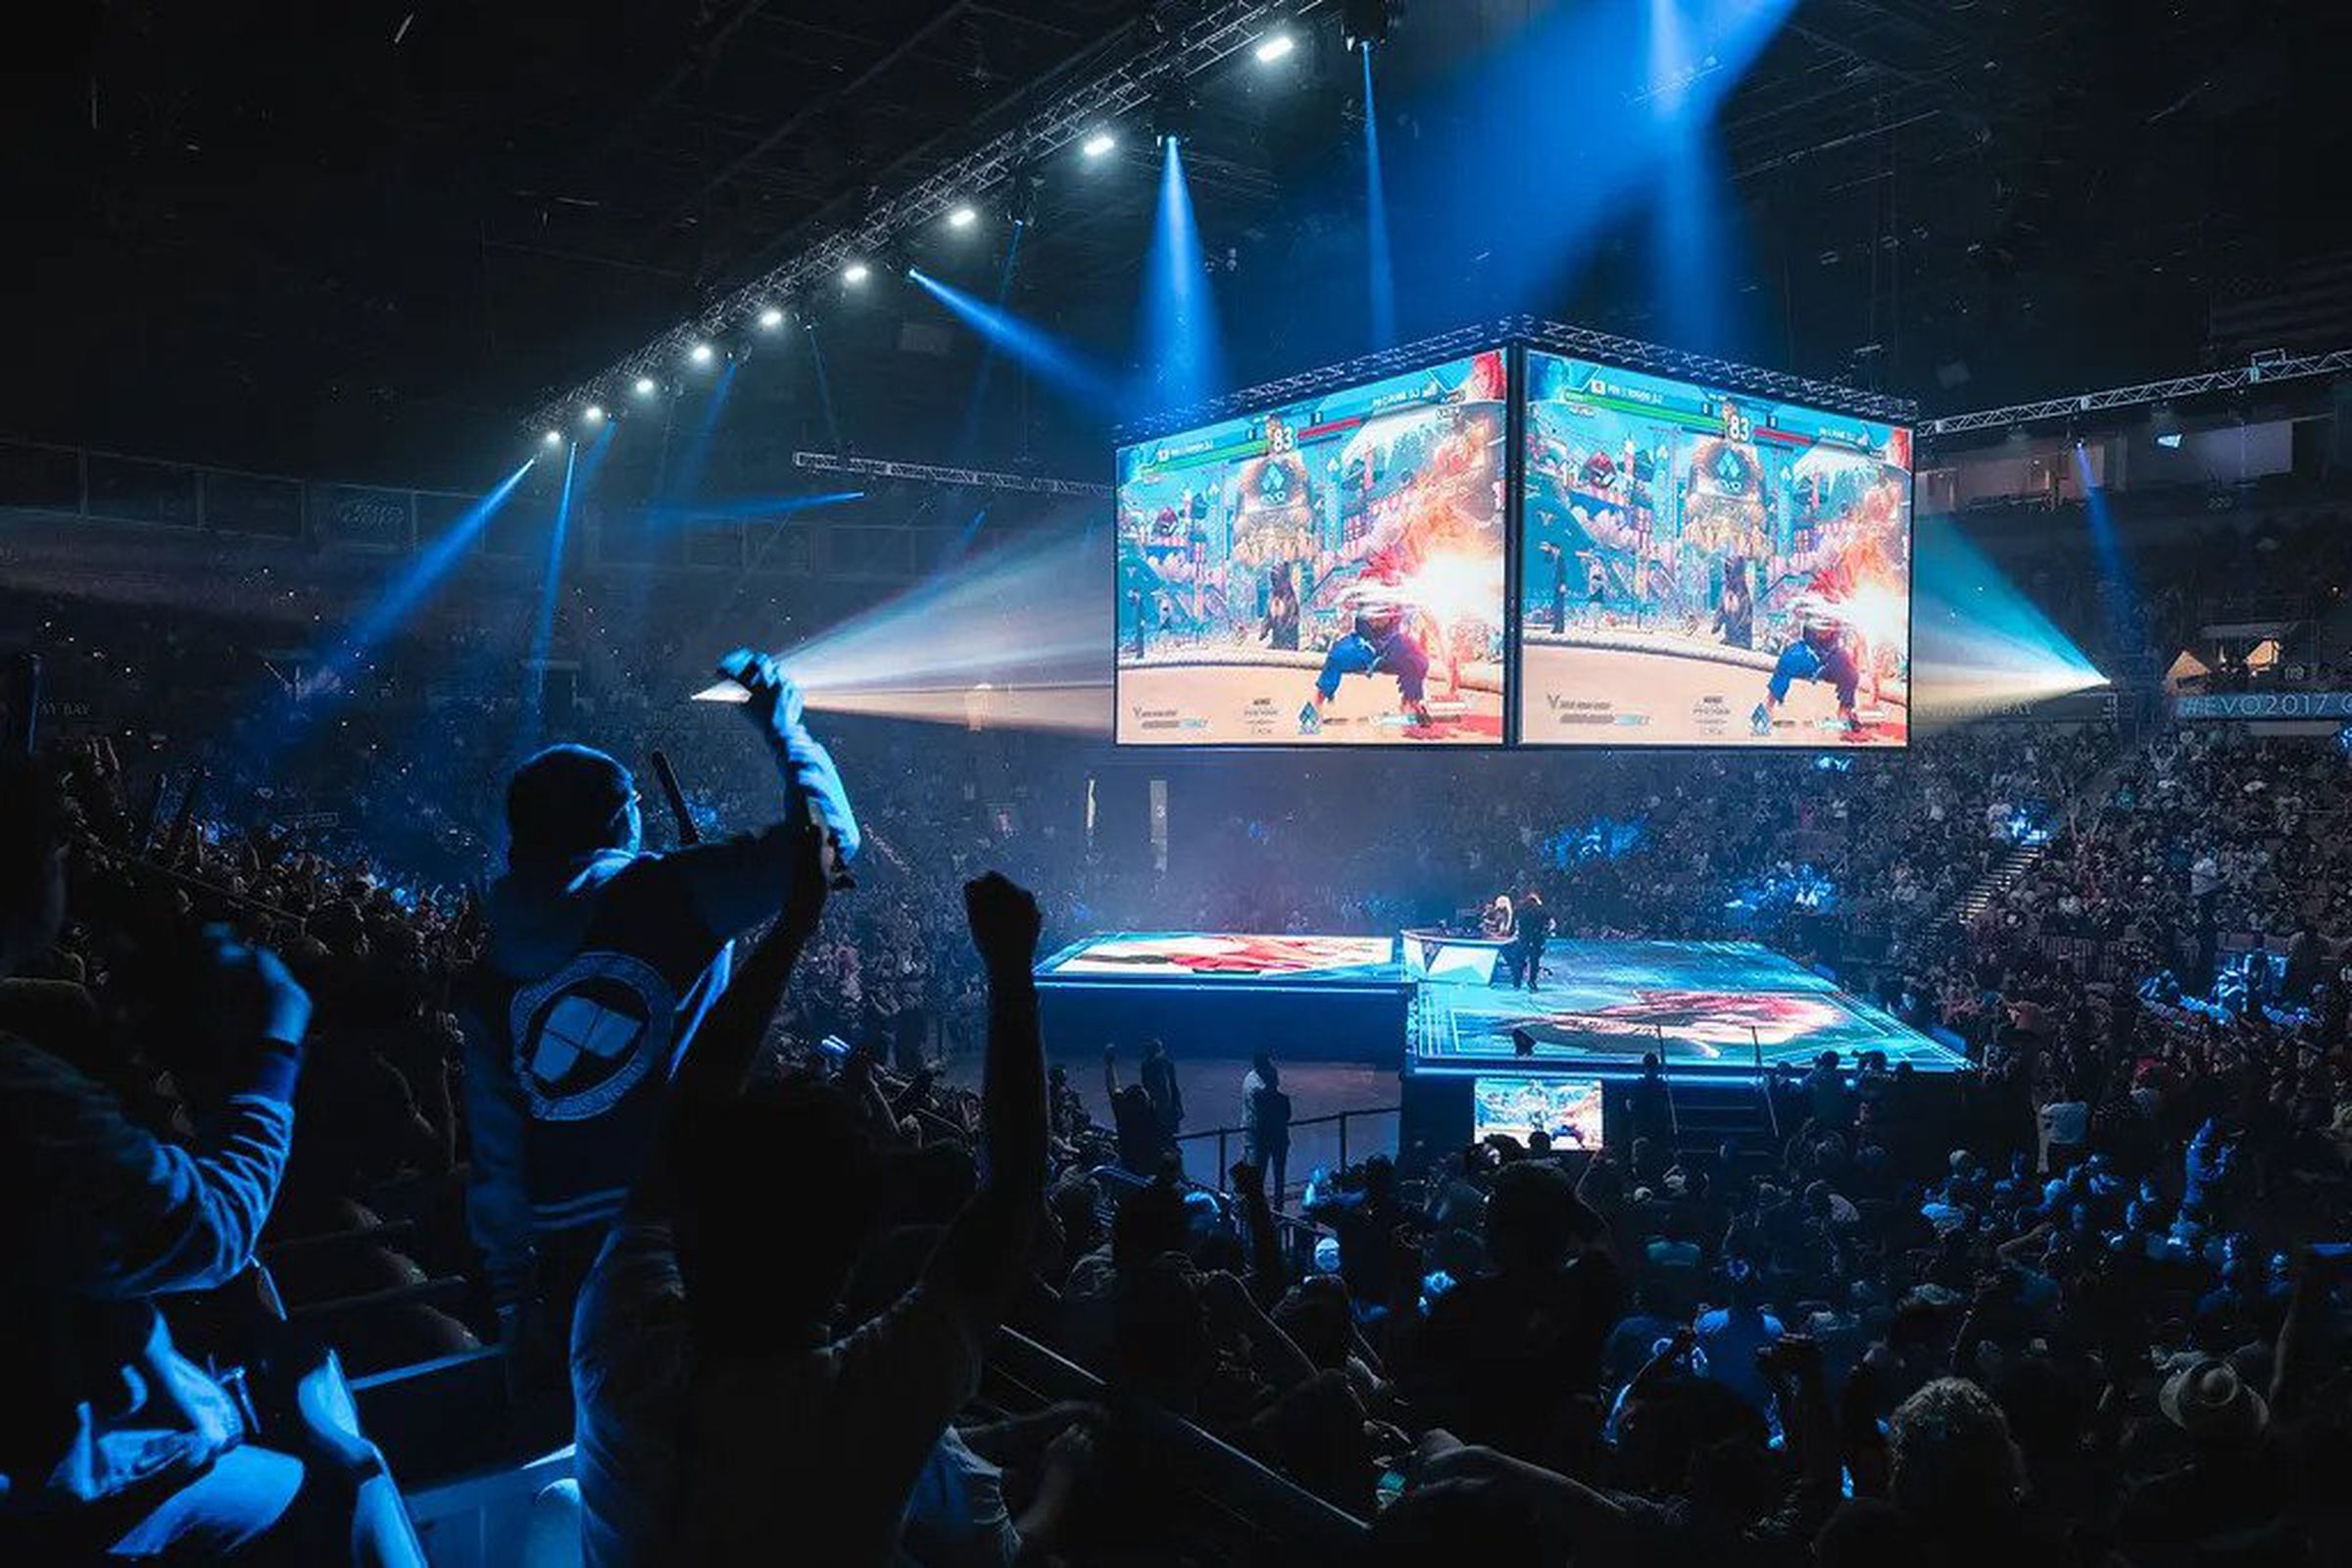 Photo from the EVO tournament that shows a darkened stadium filled with fans cheering as a Street Fighter V match plays on the main stage.